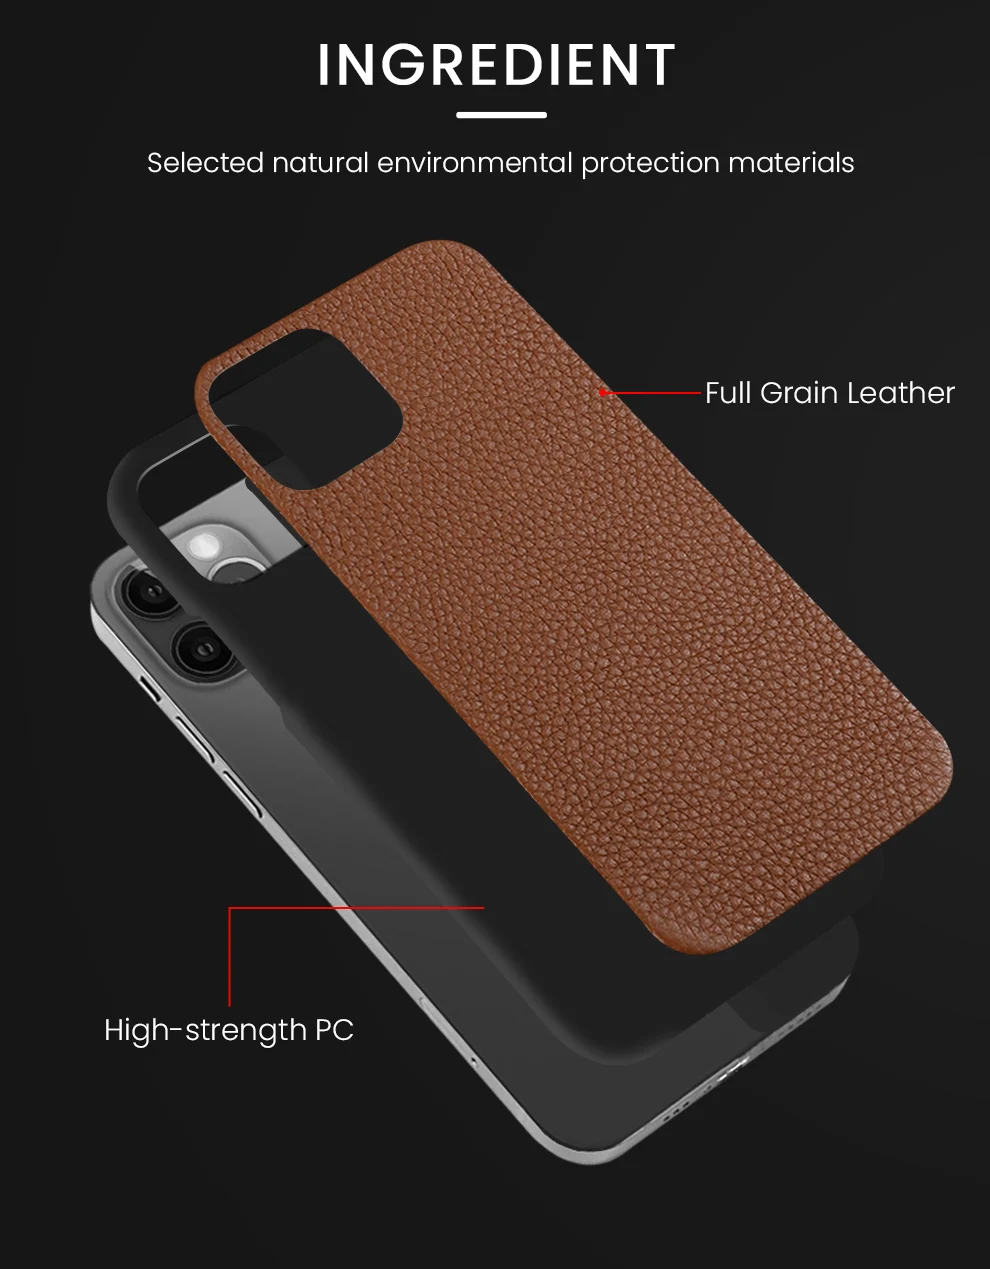 moto g stylus case Genuine Cowhide Leather Phone Case for iPhone 13 Pro Max 12 13 Mini 11 12 Pro Max X XR XS Max 6 6S 7 8 Plus SE 2020 Back Cover moto g stylus phone case